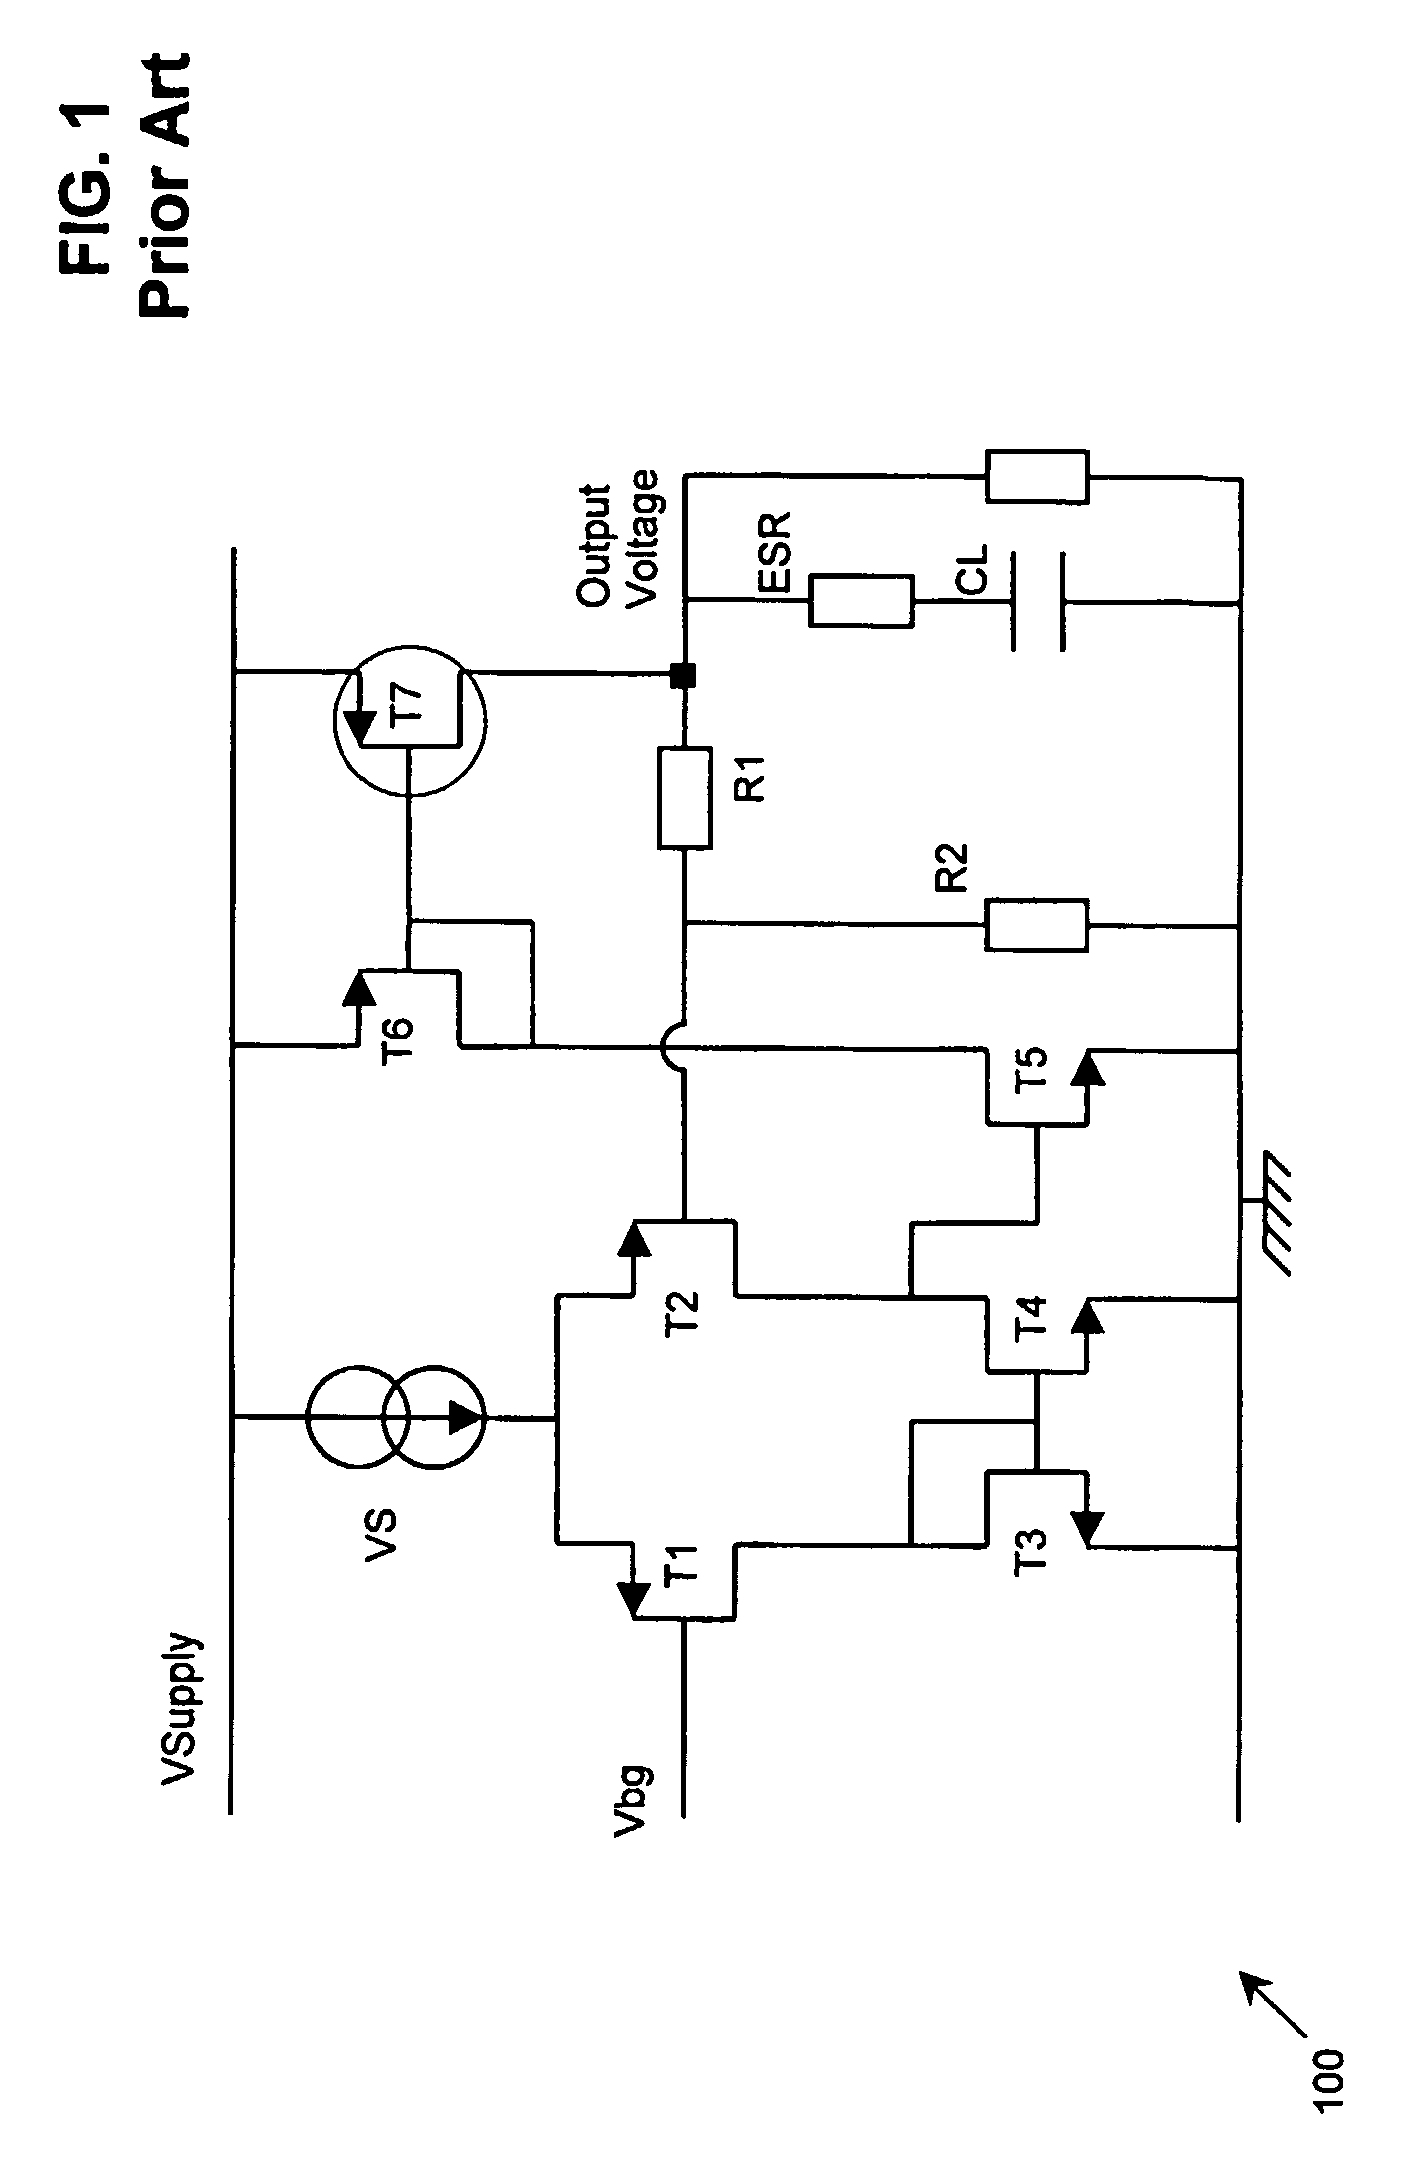 Low drop-out voltage regulator and method